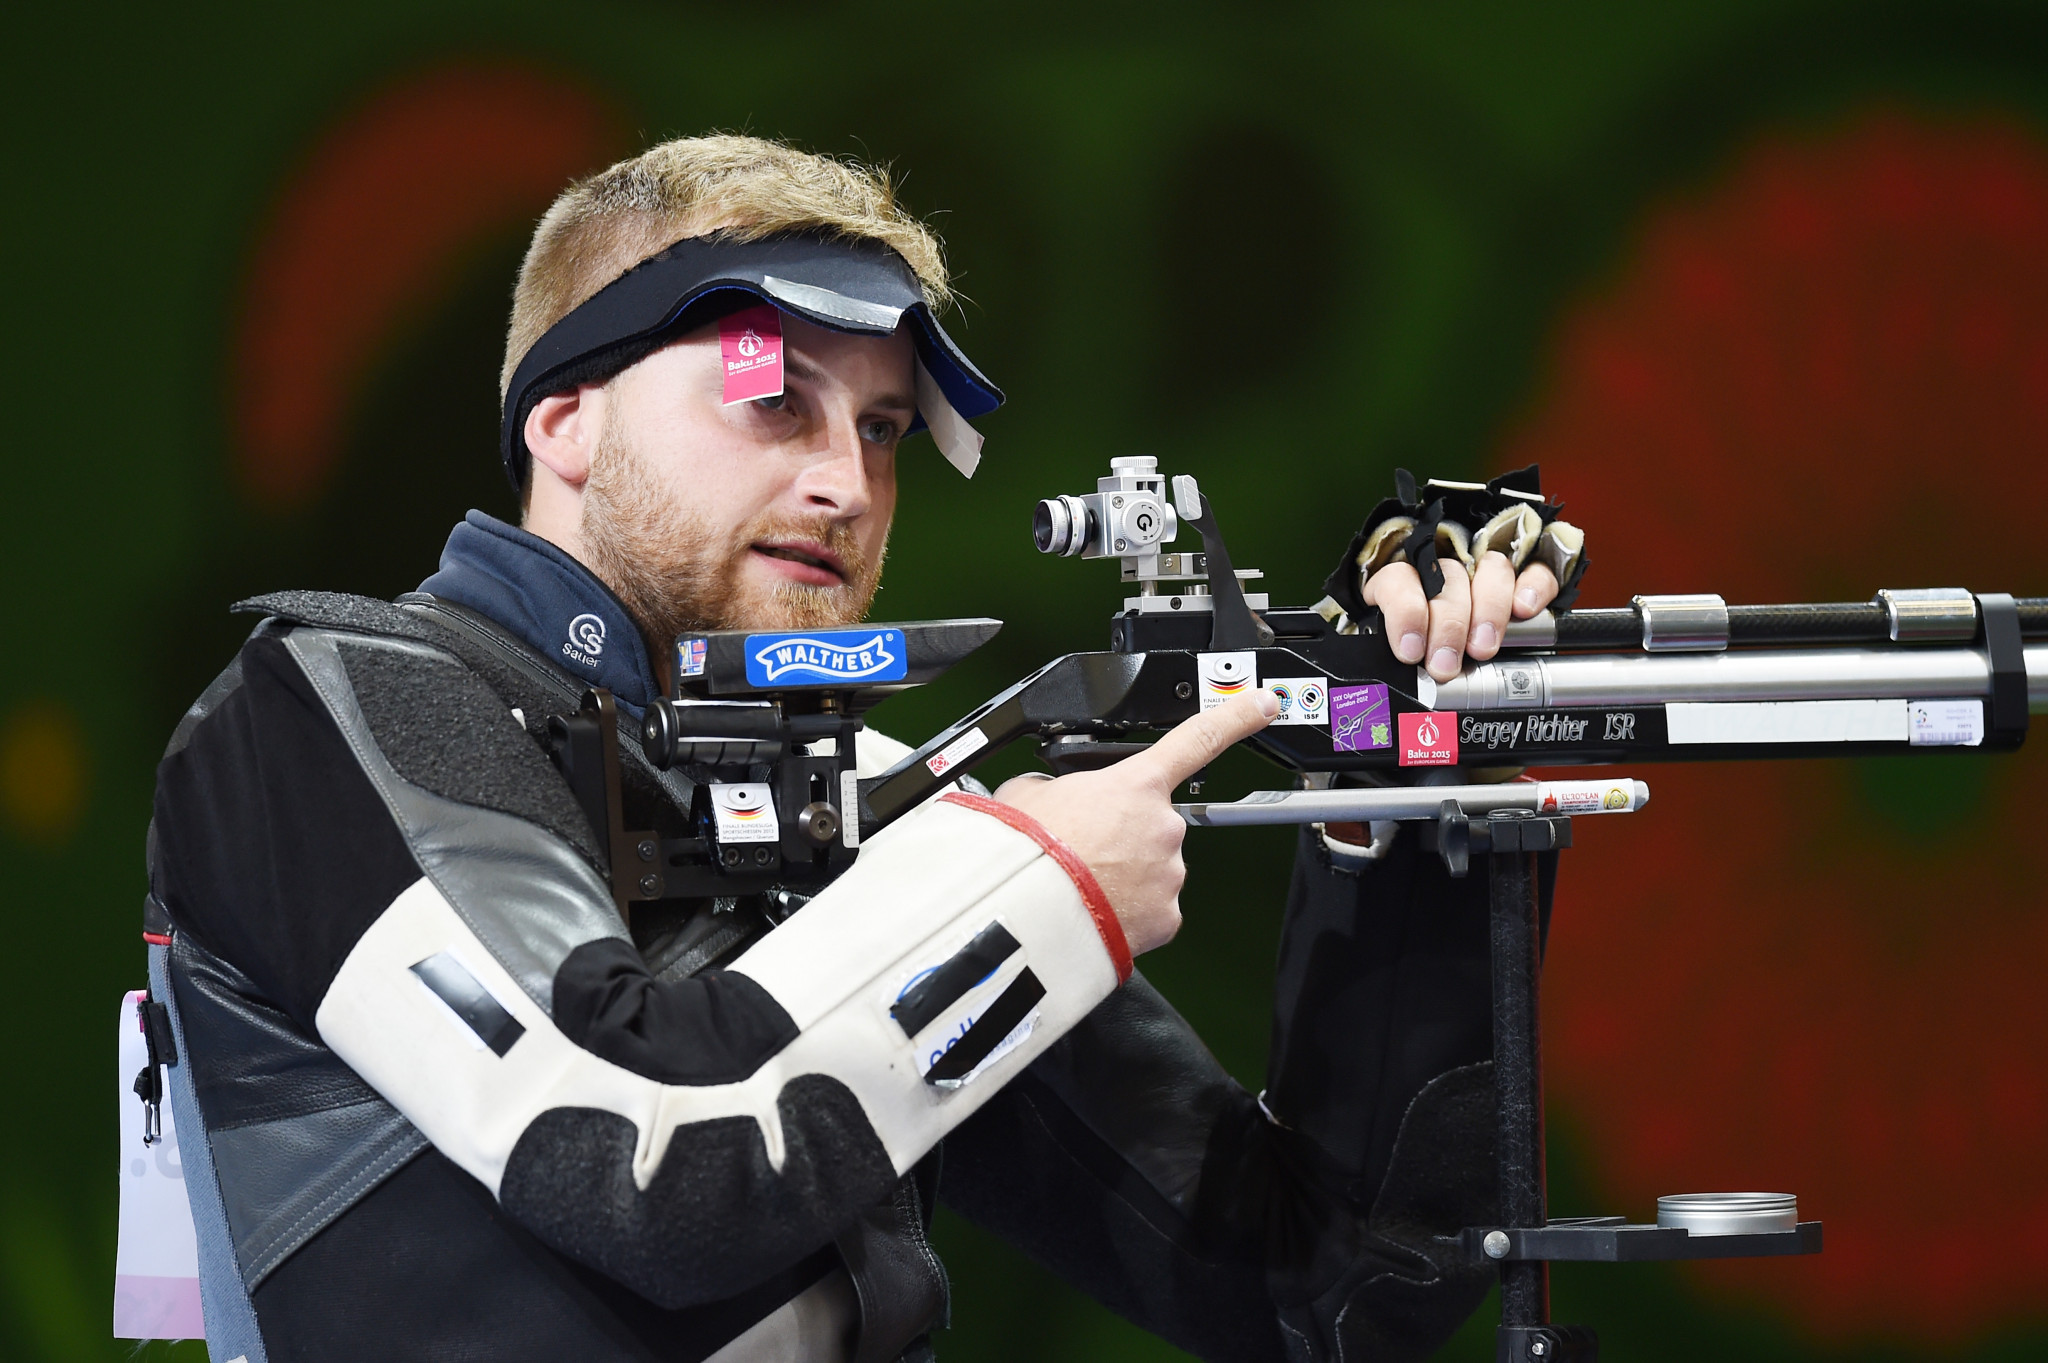 Sergey Richter goes into tomorrow's men's 10m air rifle final with the best qualifying score ©Getty Images